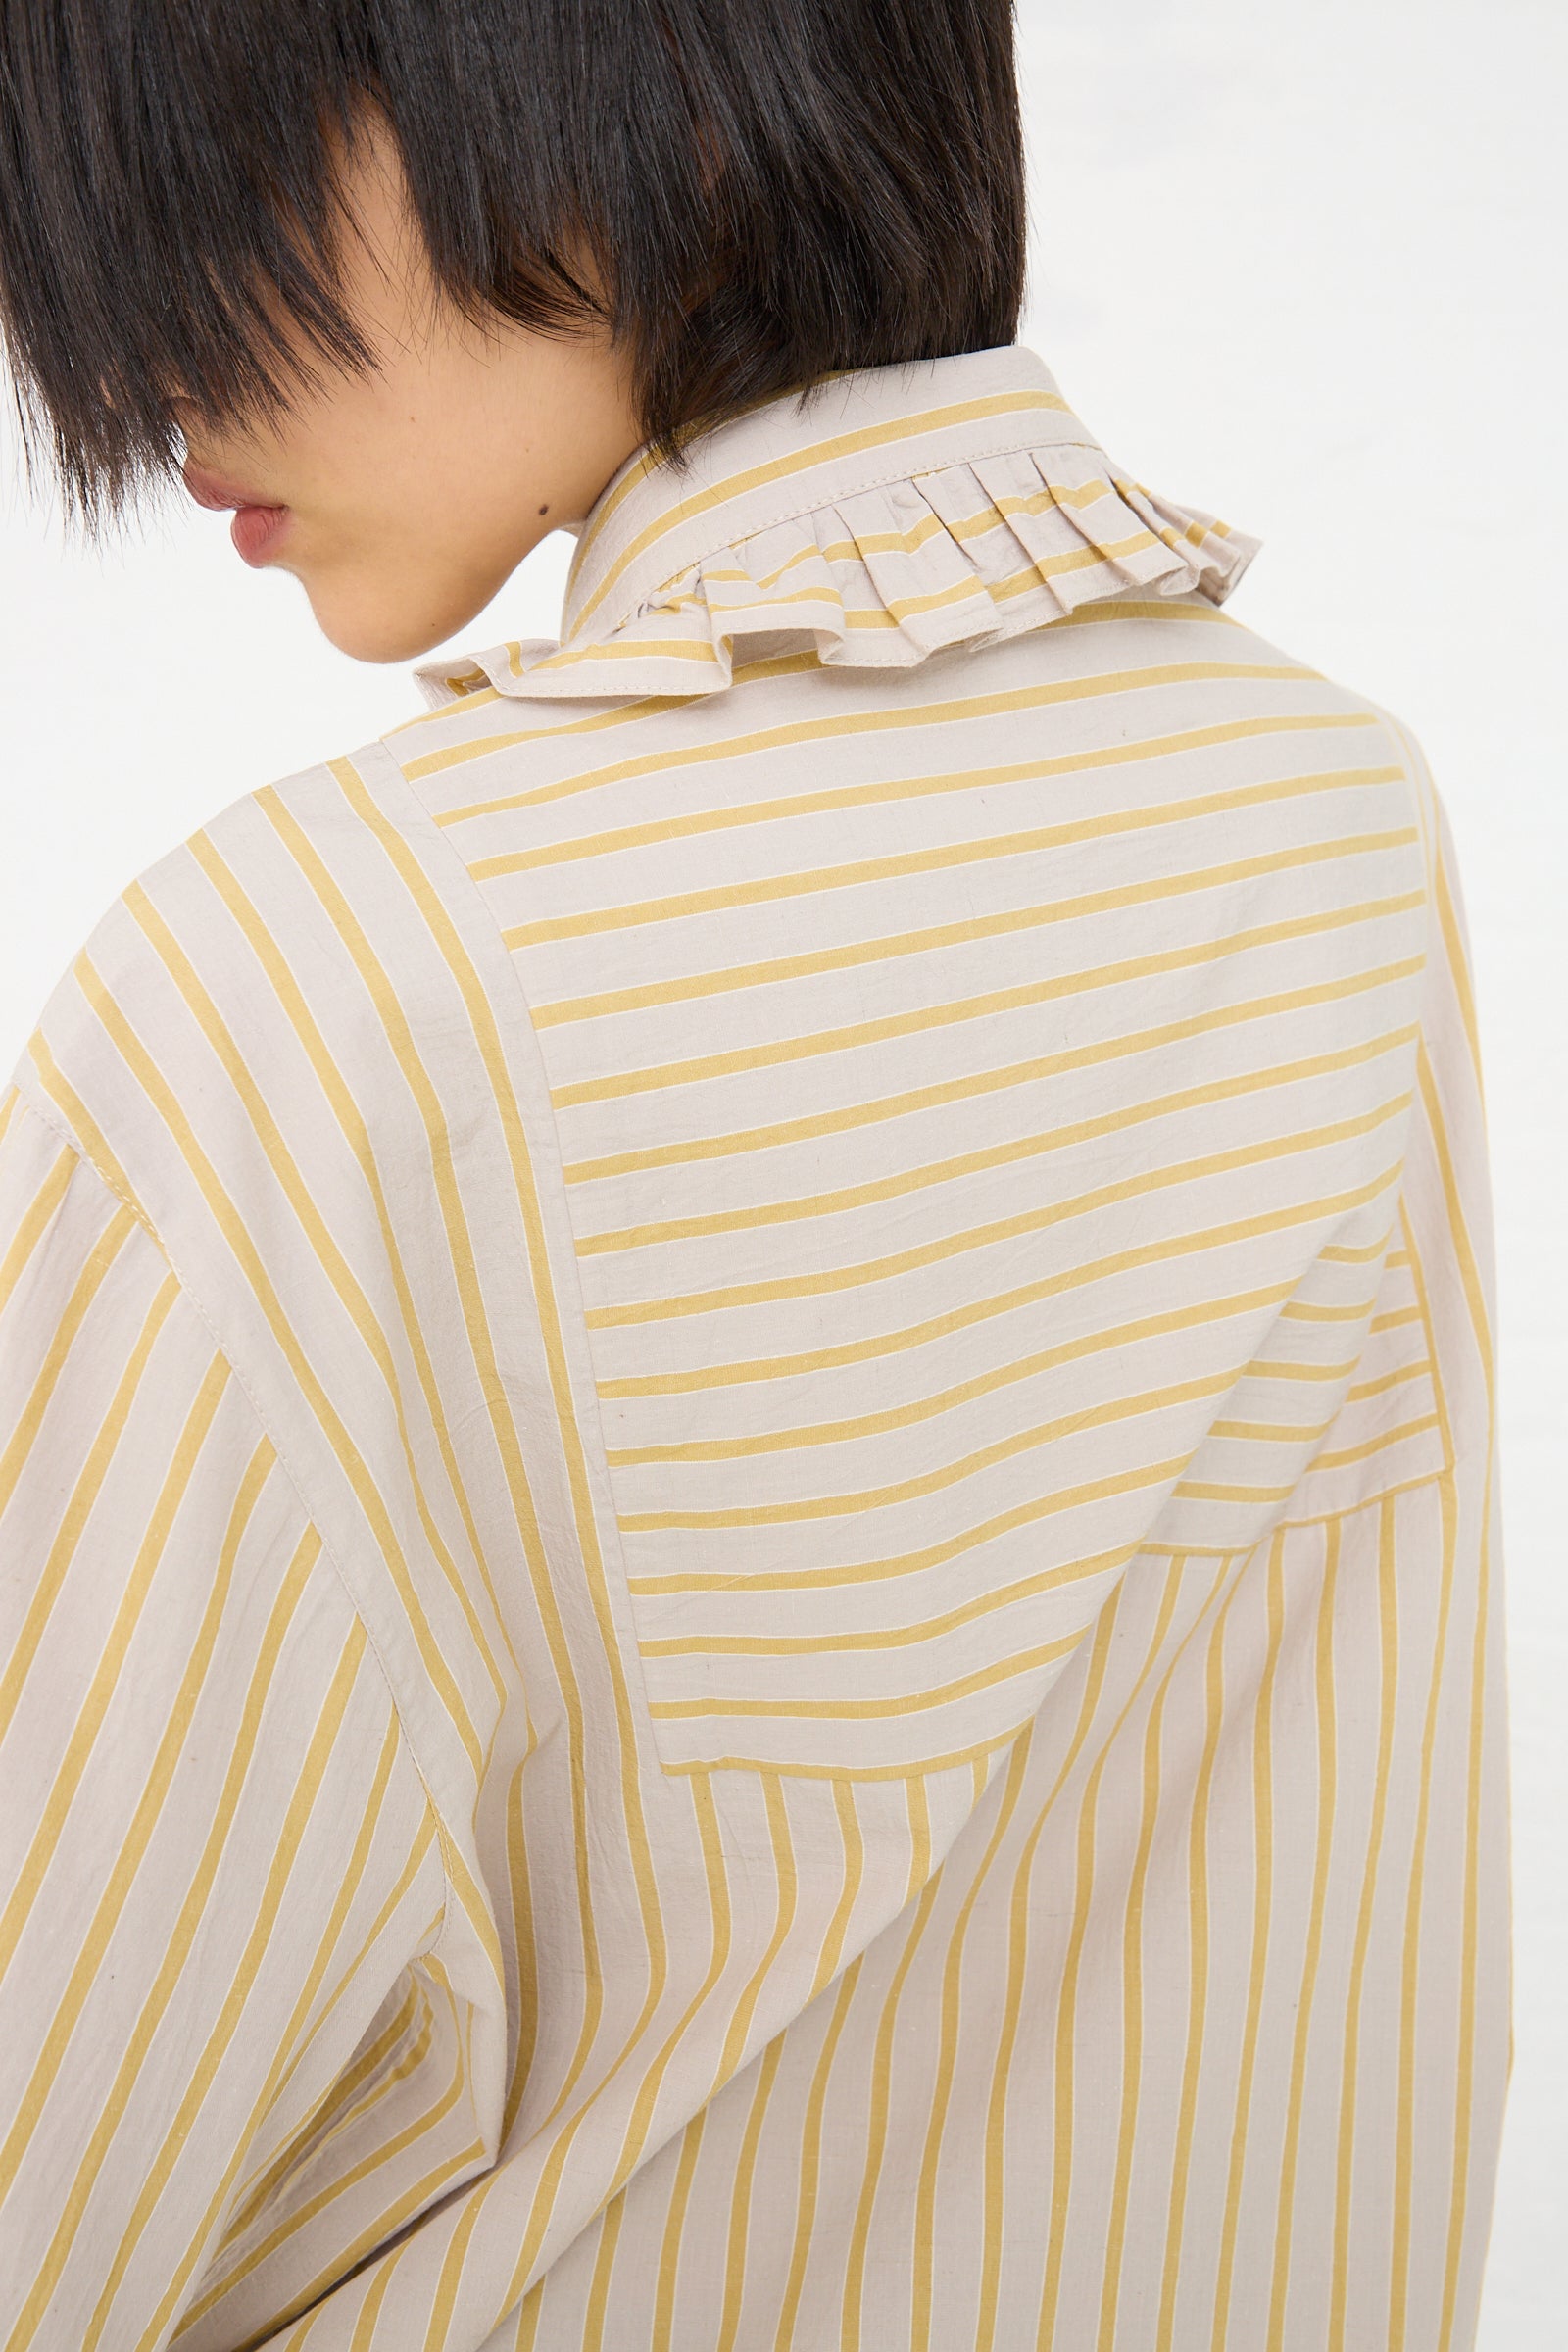 A person with short hair wearing a Cawley Japanese Cotton Ruffle Shirt in Sun and Grey with a focus on the ruffle collar and back.